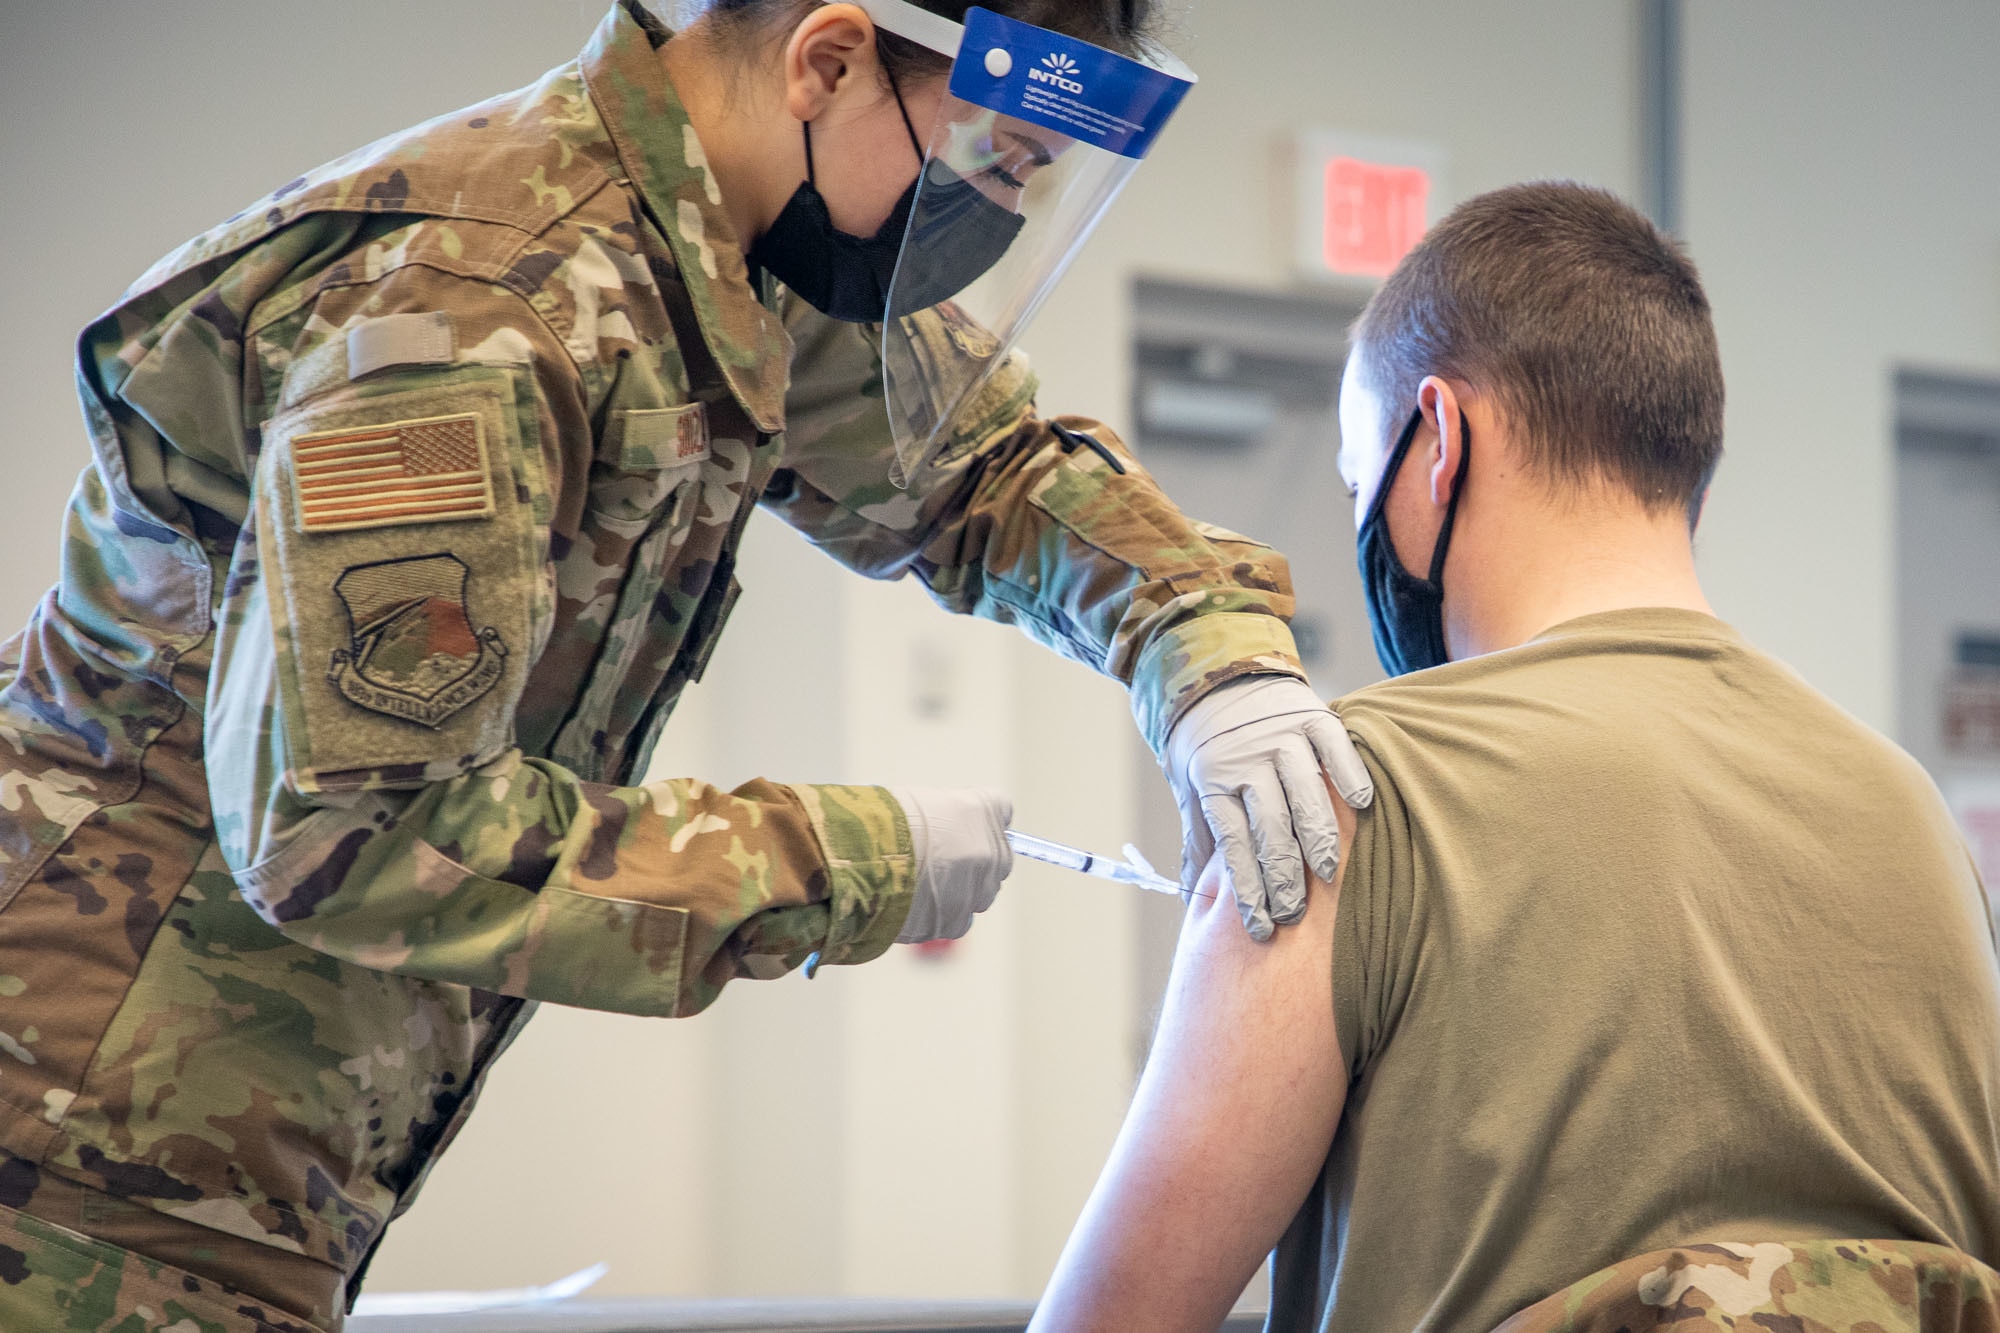 Staff Sgt. Bruna Souza, 102nd Medical Group, administers a COVID-19 vaccine during an immunization clinic at Otis Air National Guard Base, Feb. 6, 2021. The vaccine will be delivered in a phased approach, beginning with emergency services personnel, security forces, and medical and health care professionals.